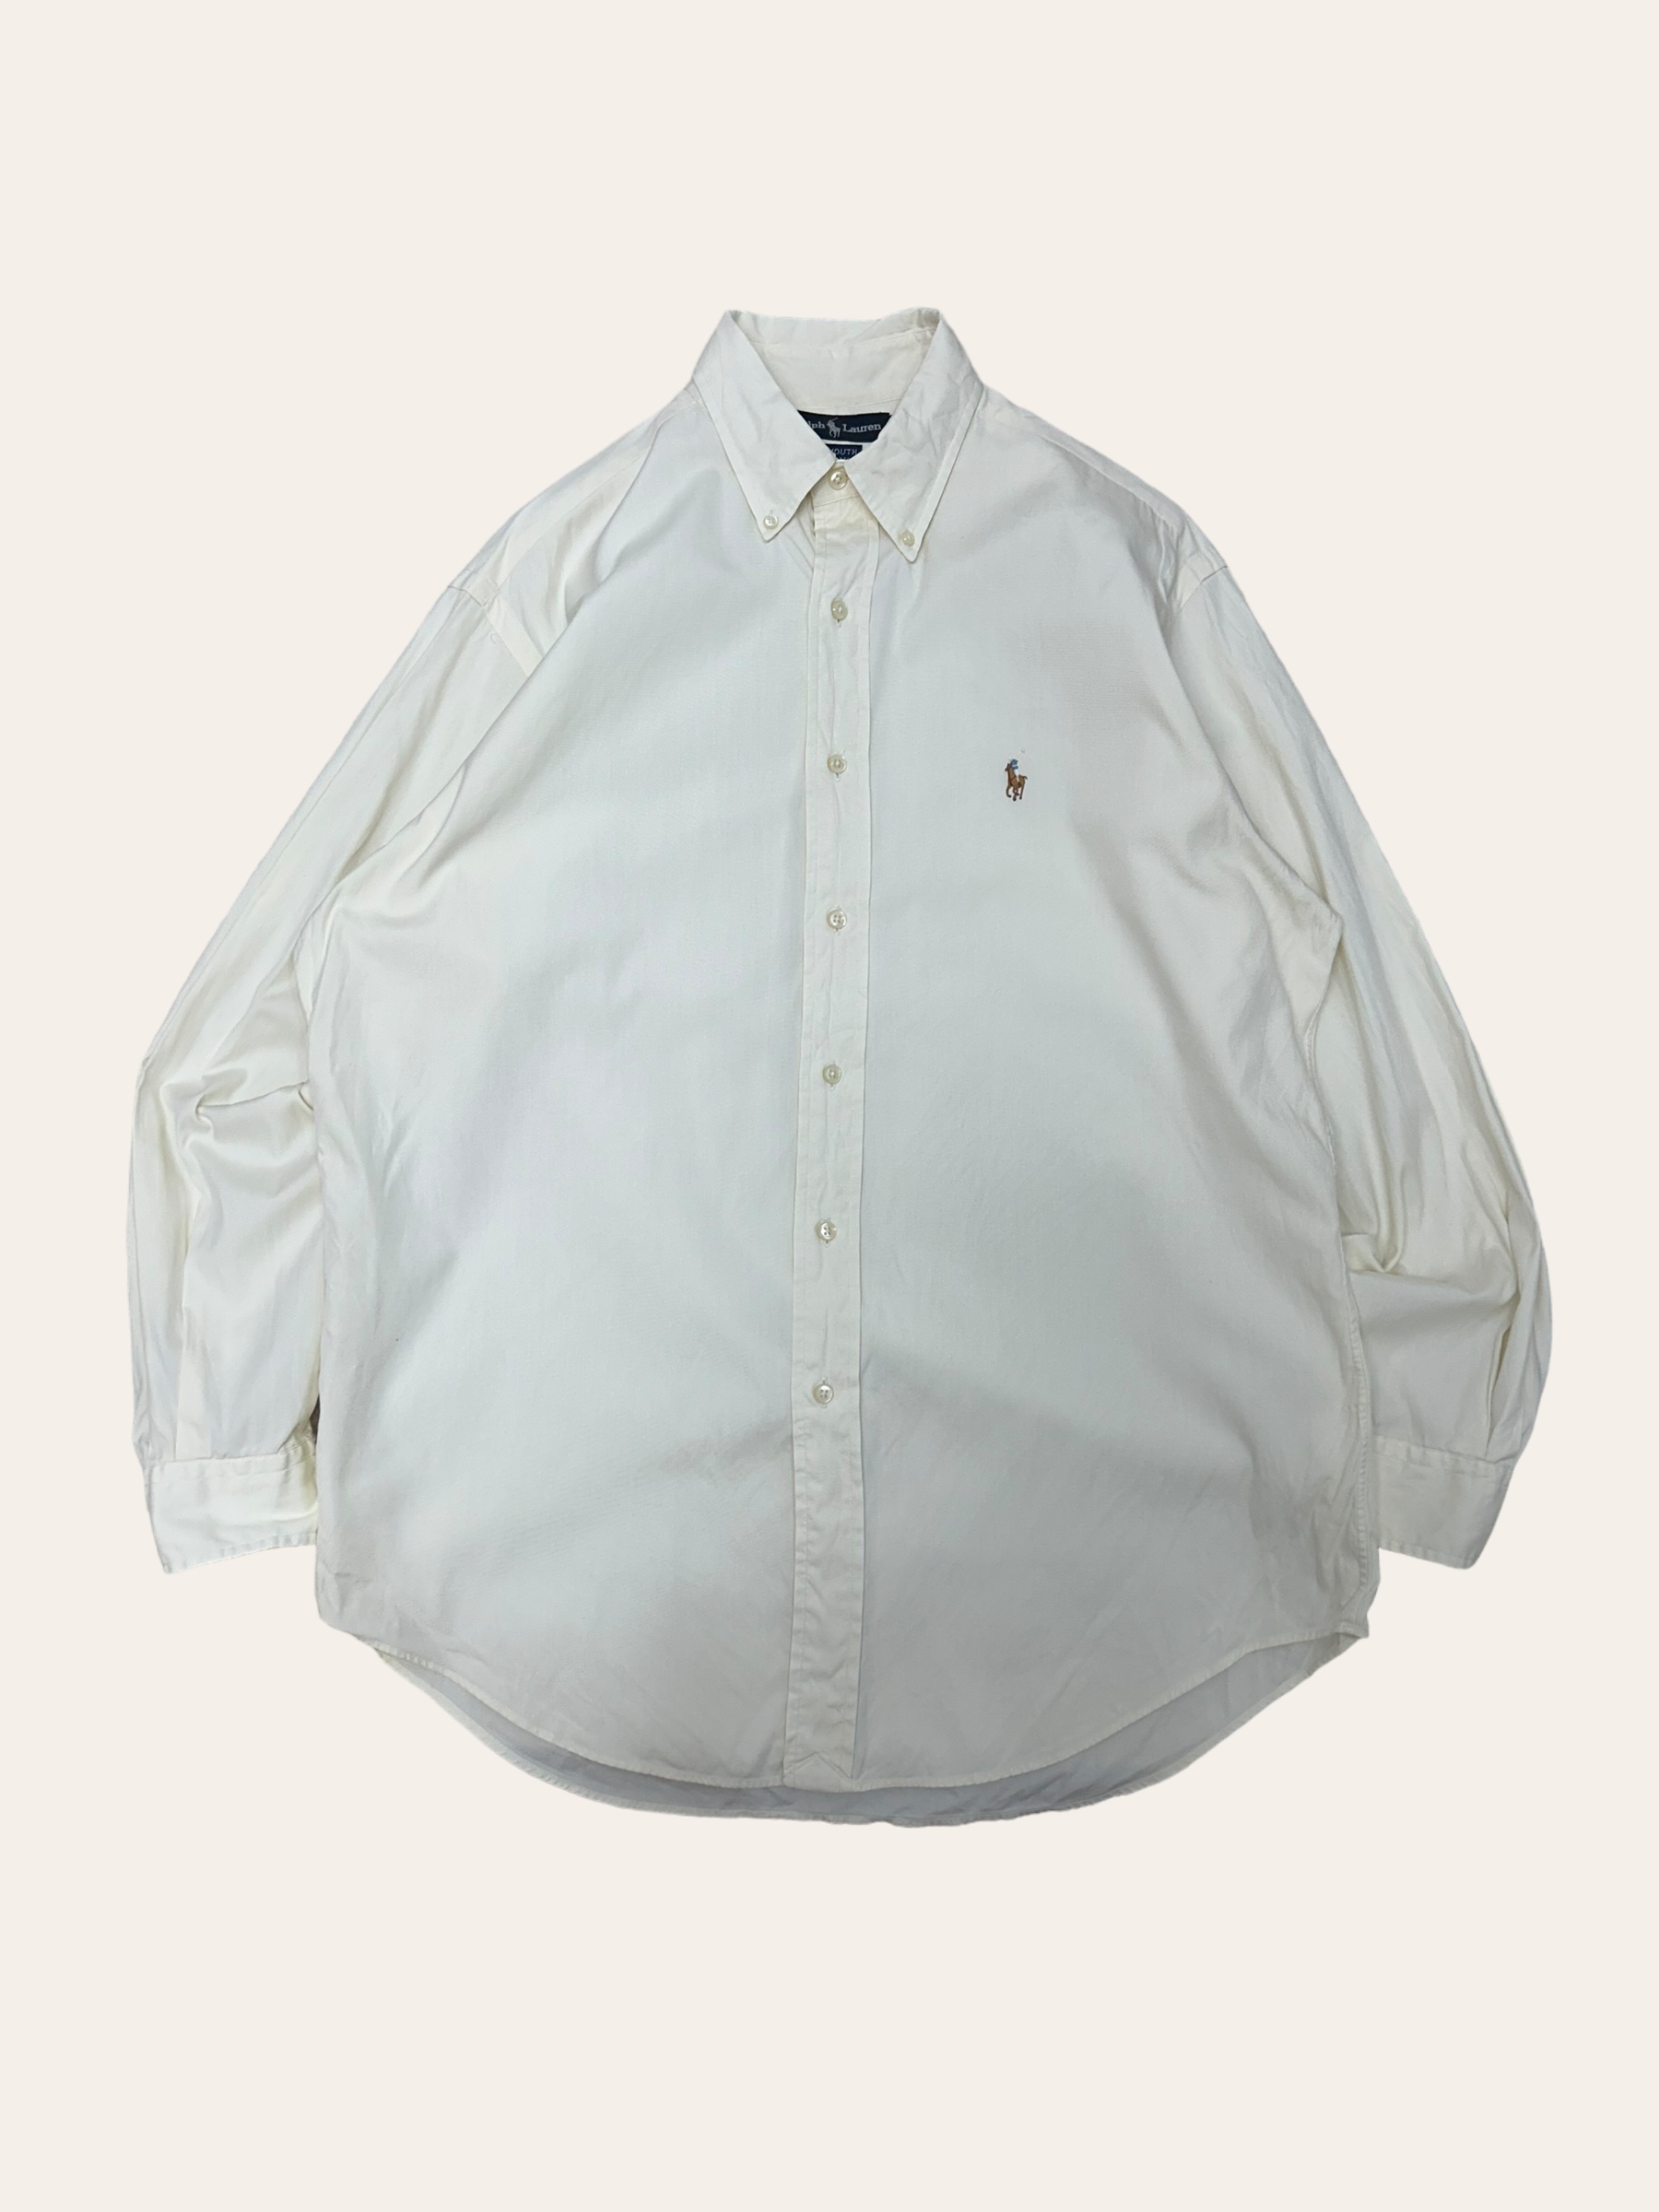 (From USA)Polo ralph lauren ivory color solid shirt 15.5